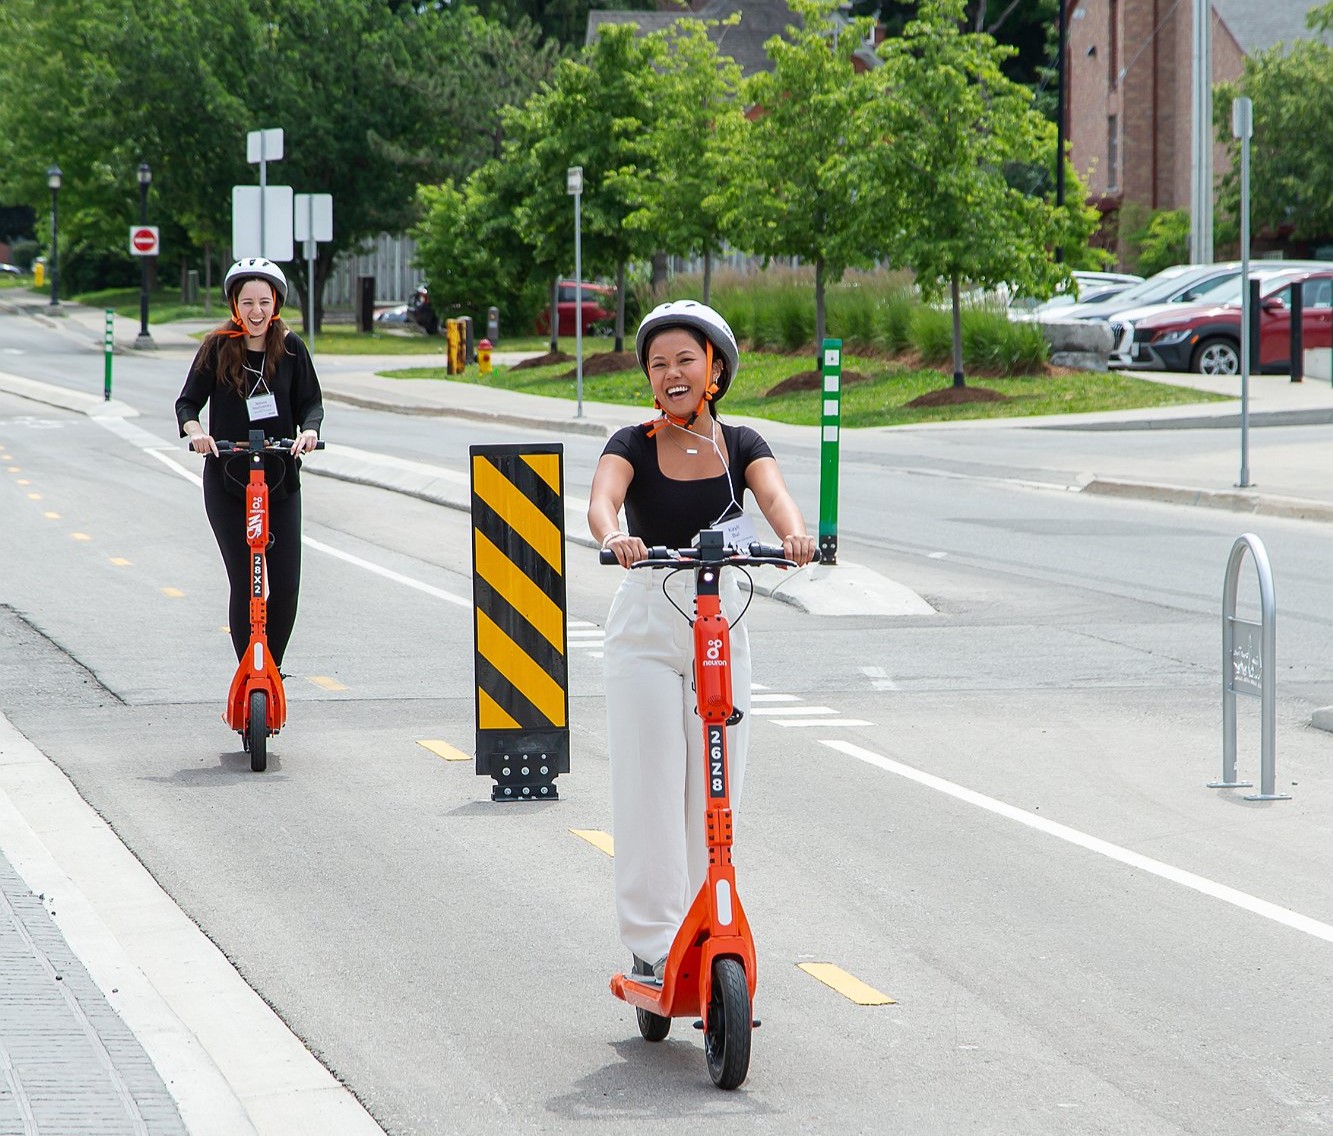 Two people scootering down the road on electric scooters